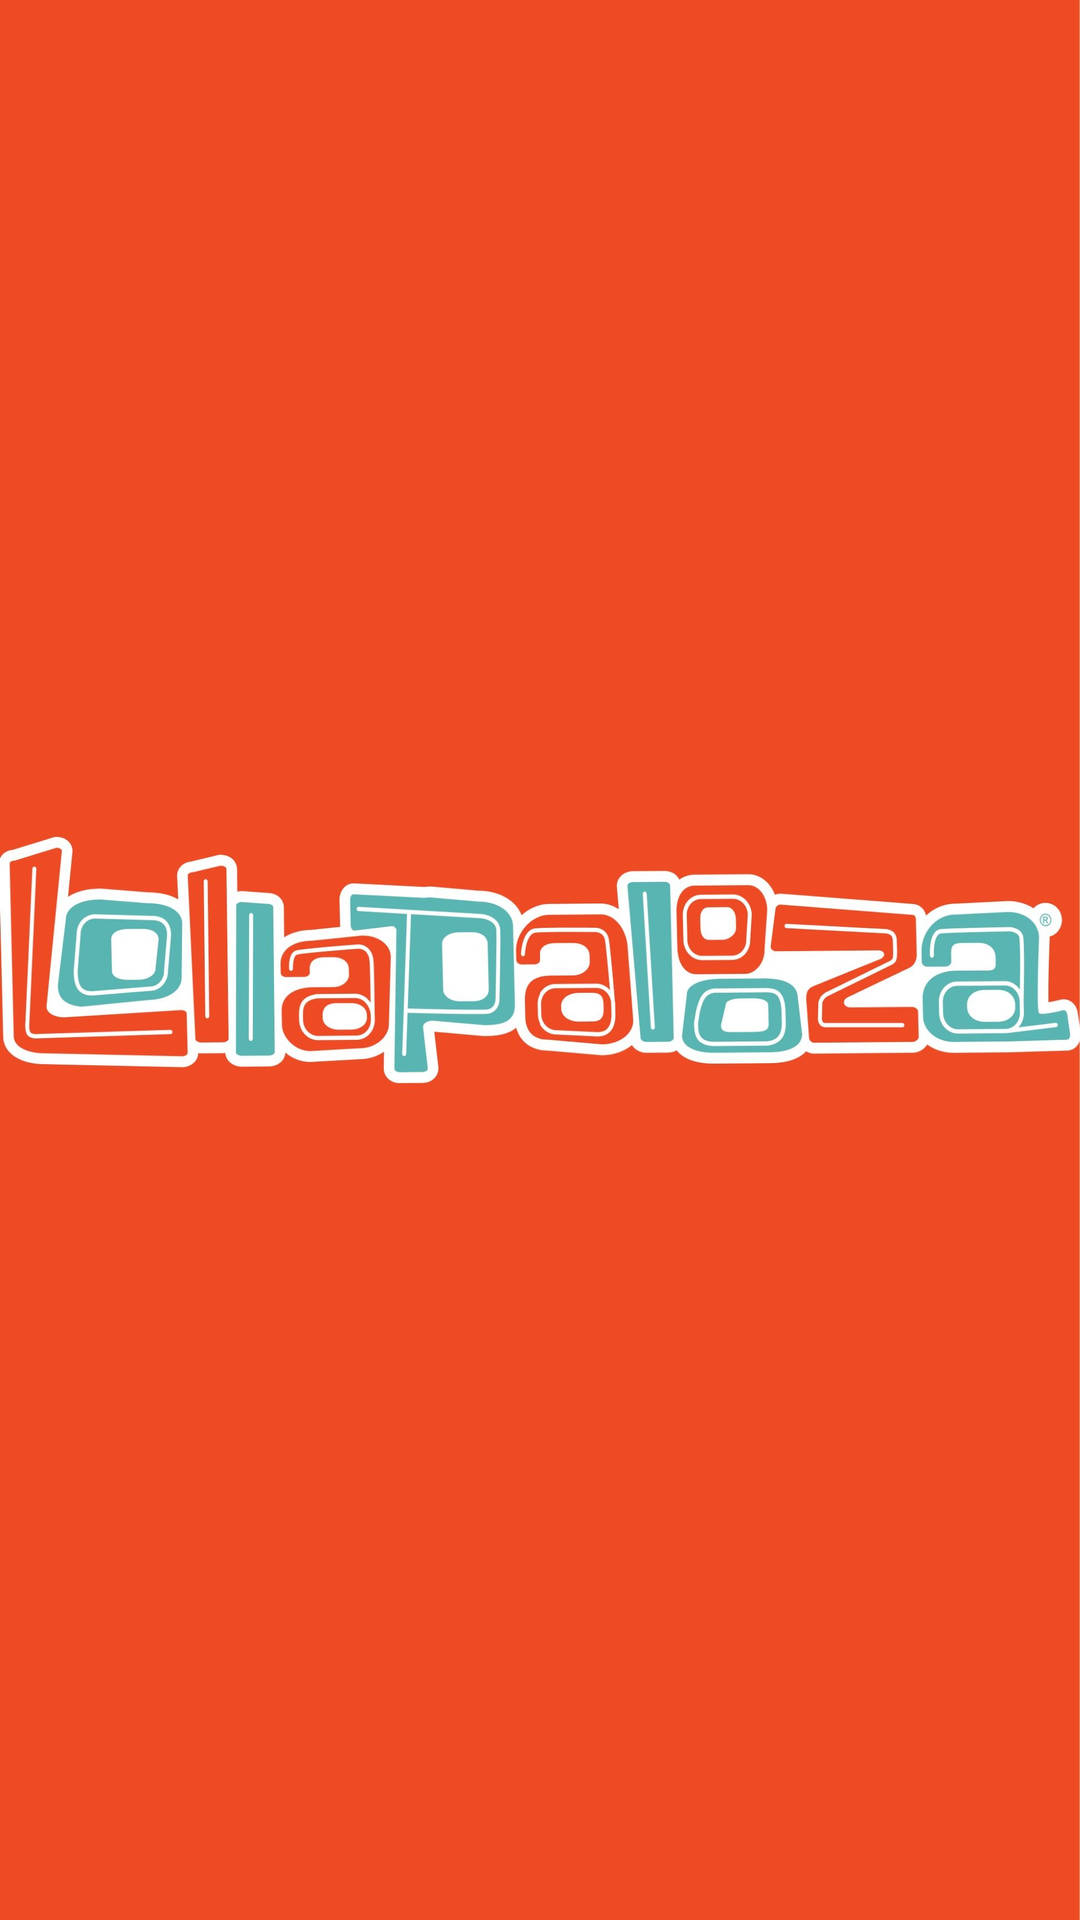 Experience The Energy Of Lollapalooza Background